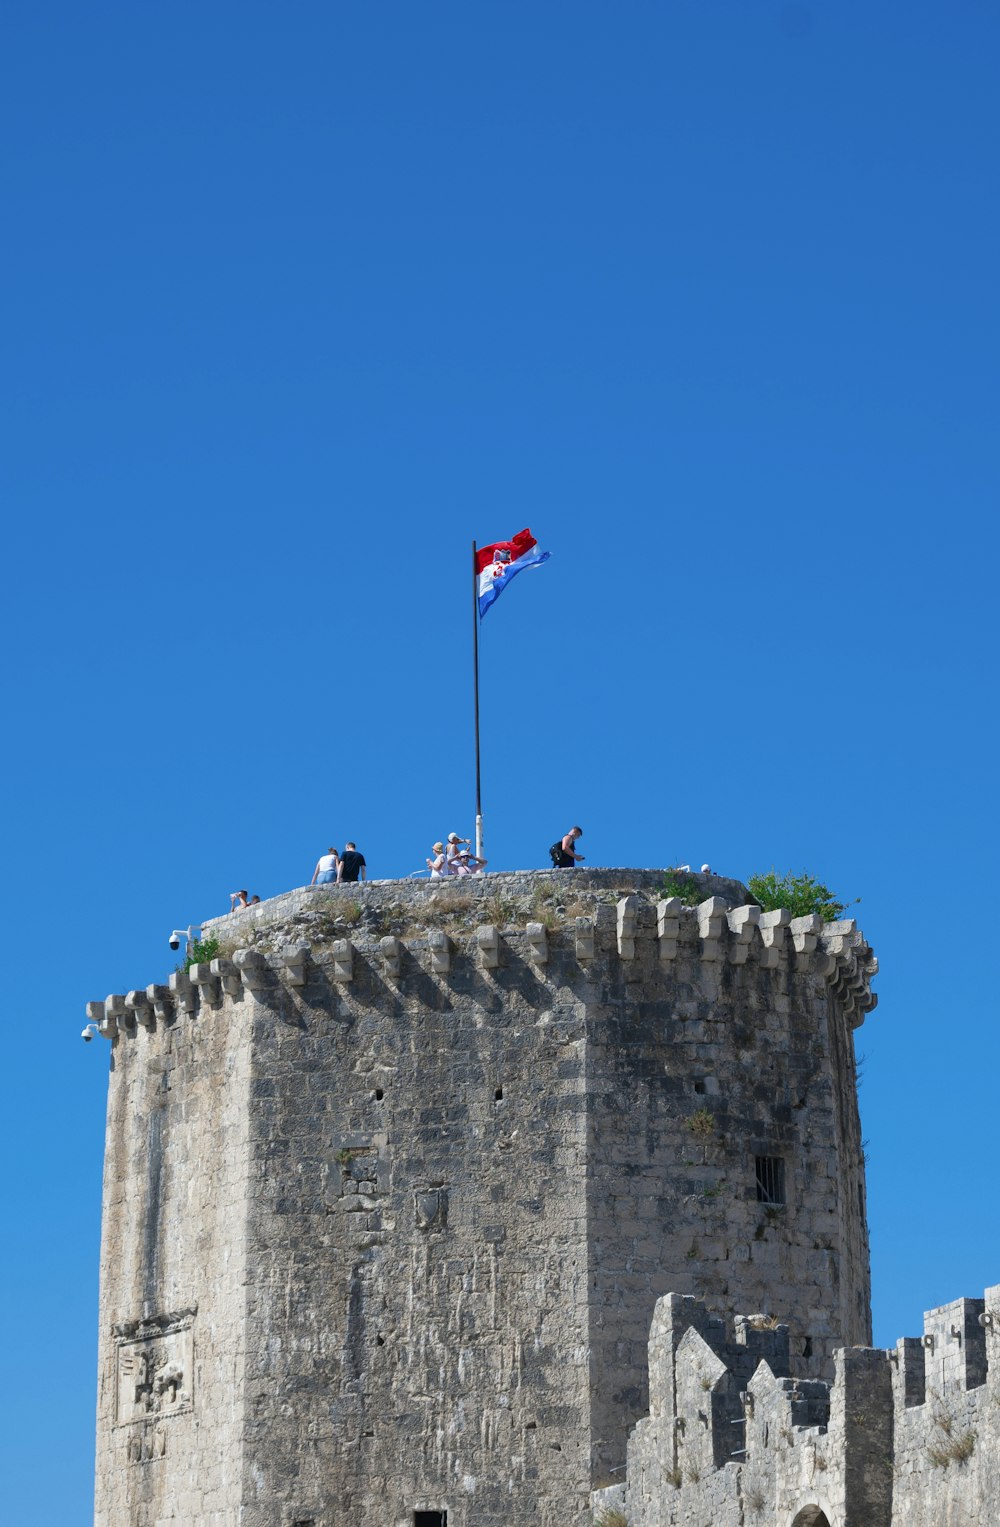 a flag flying on top of a stone building